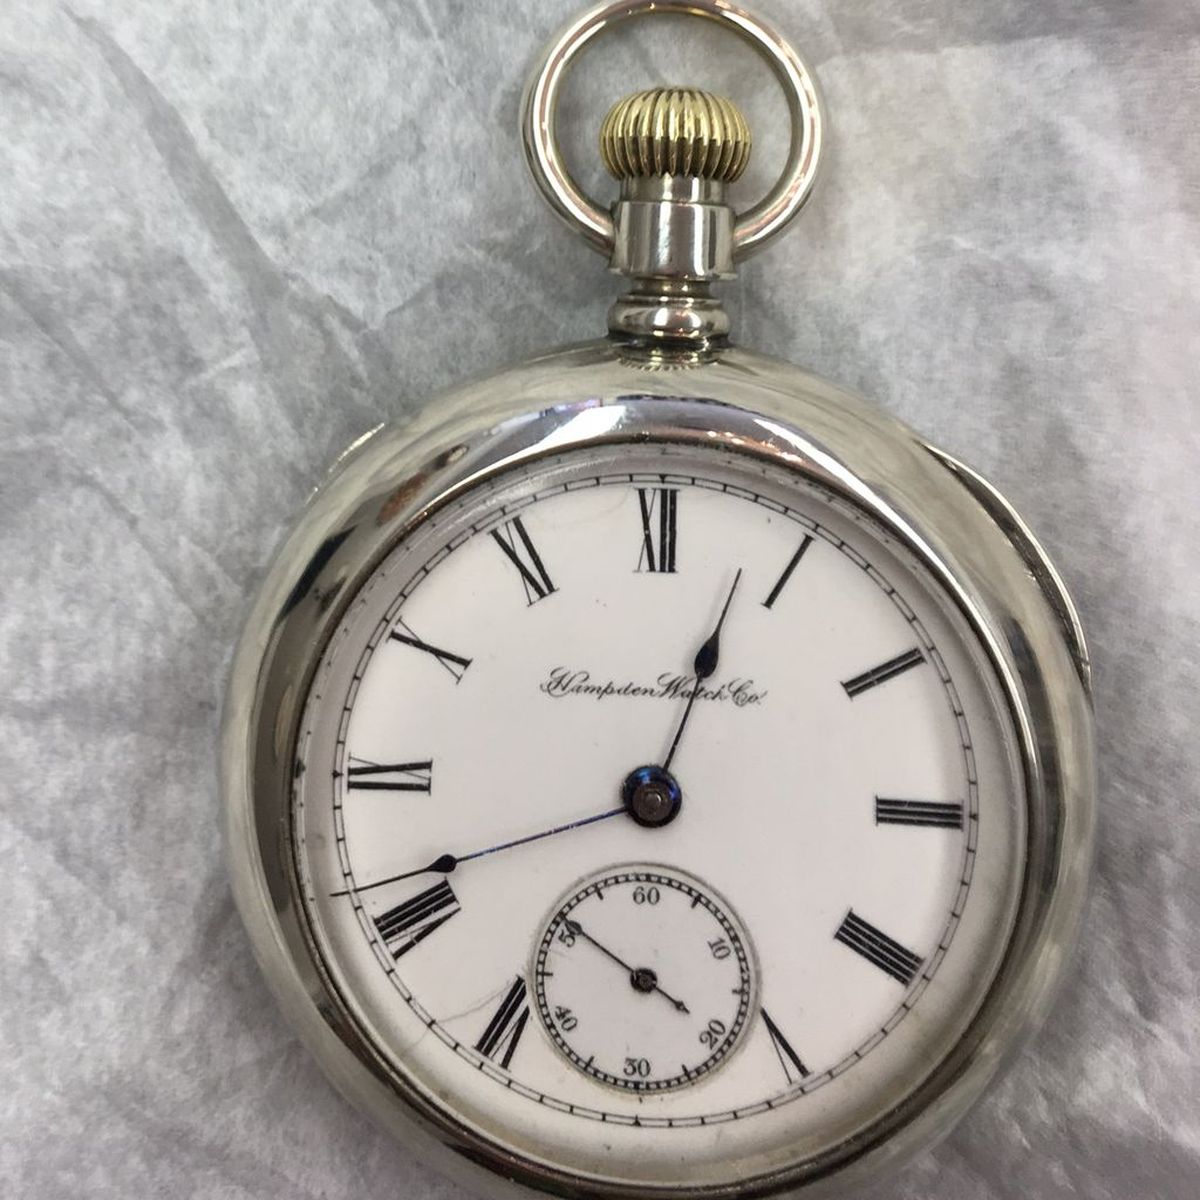 Antique Pocket Watch Repair and Service